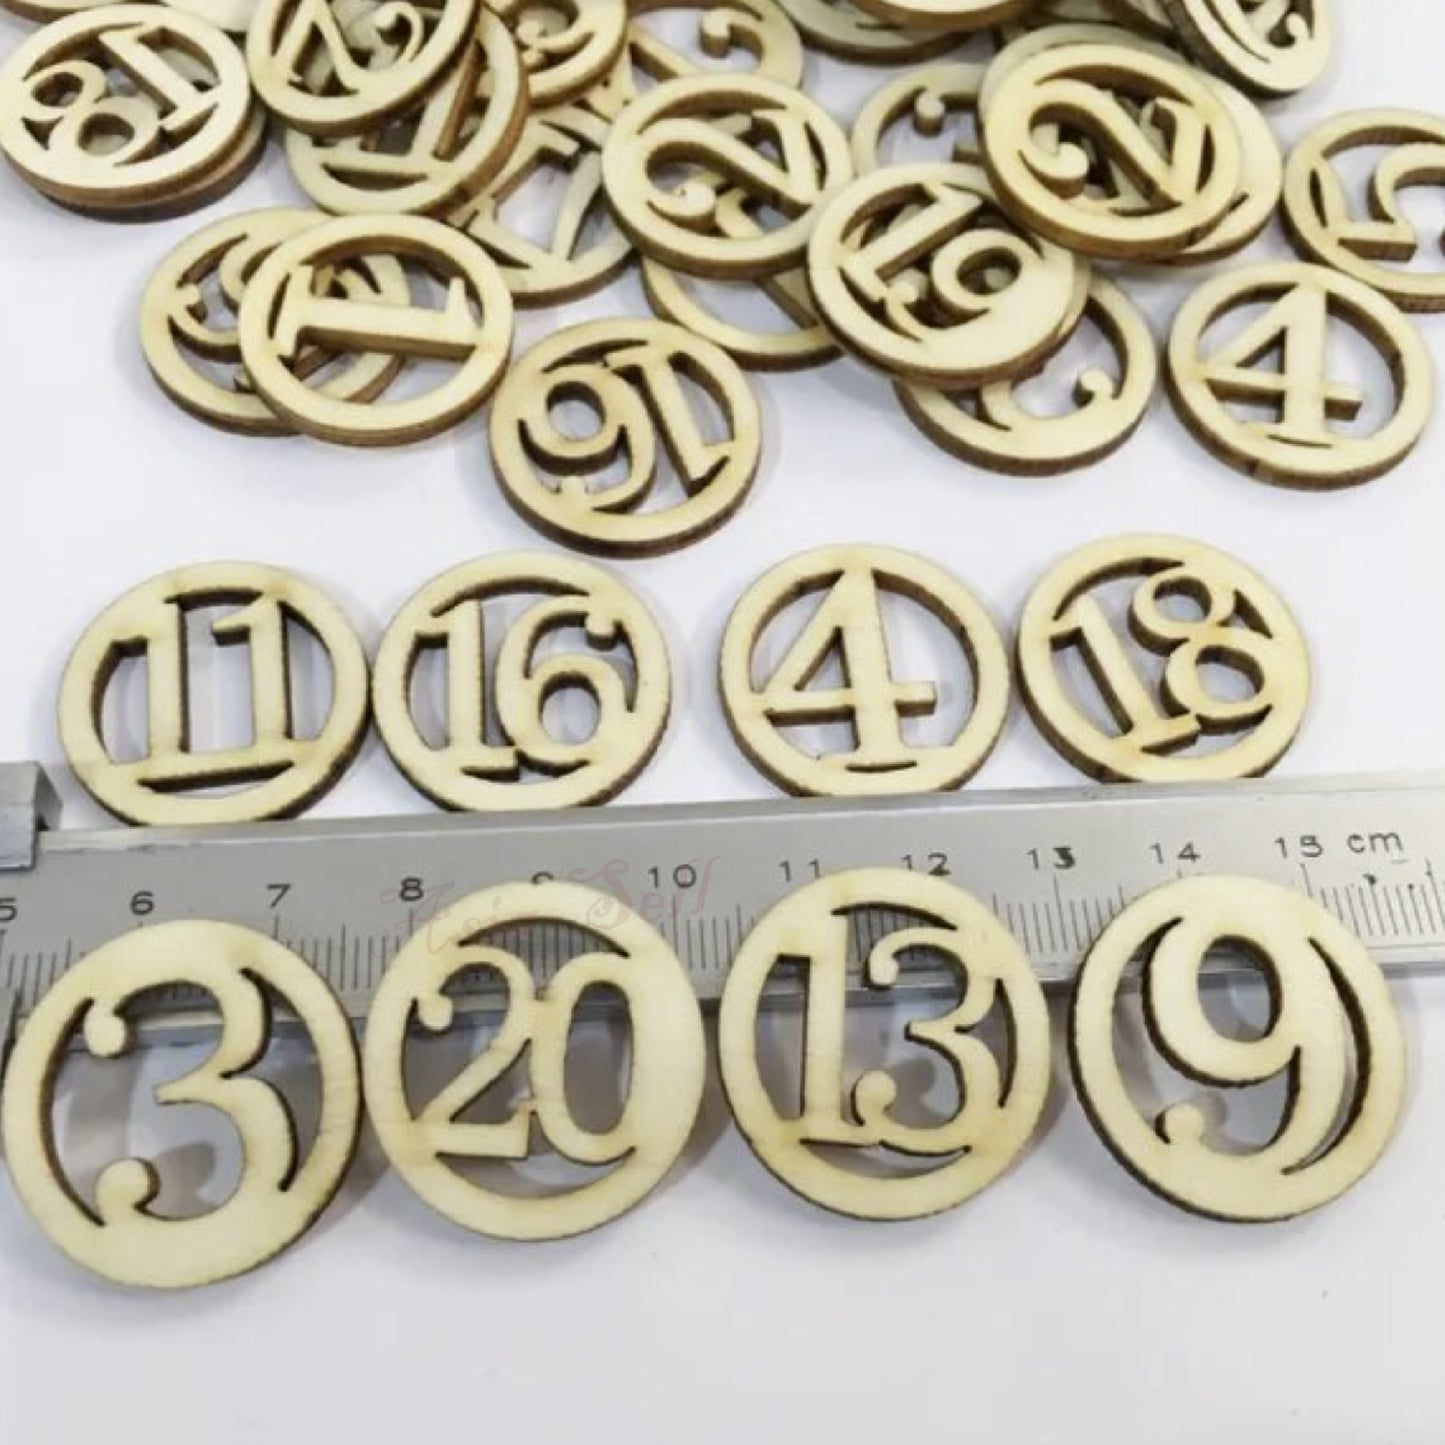 50pcs 2.5cm Wooden Numbers in Circles Birthday Party Craft Pendant Hanging Ornament Decor Home Decorations DIY